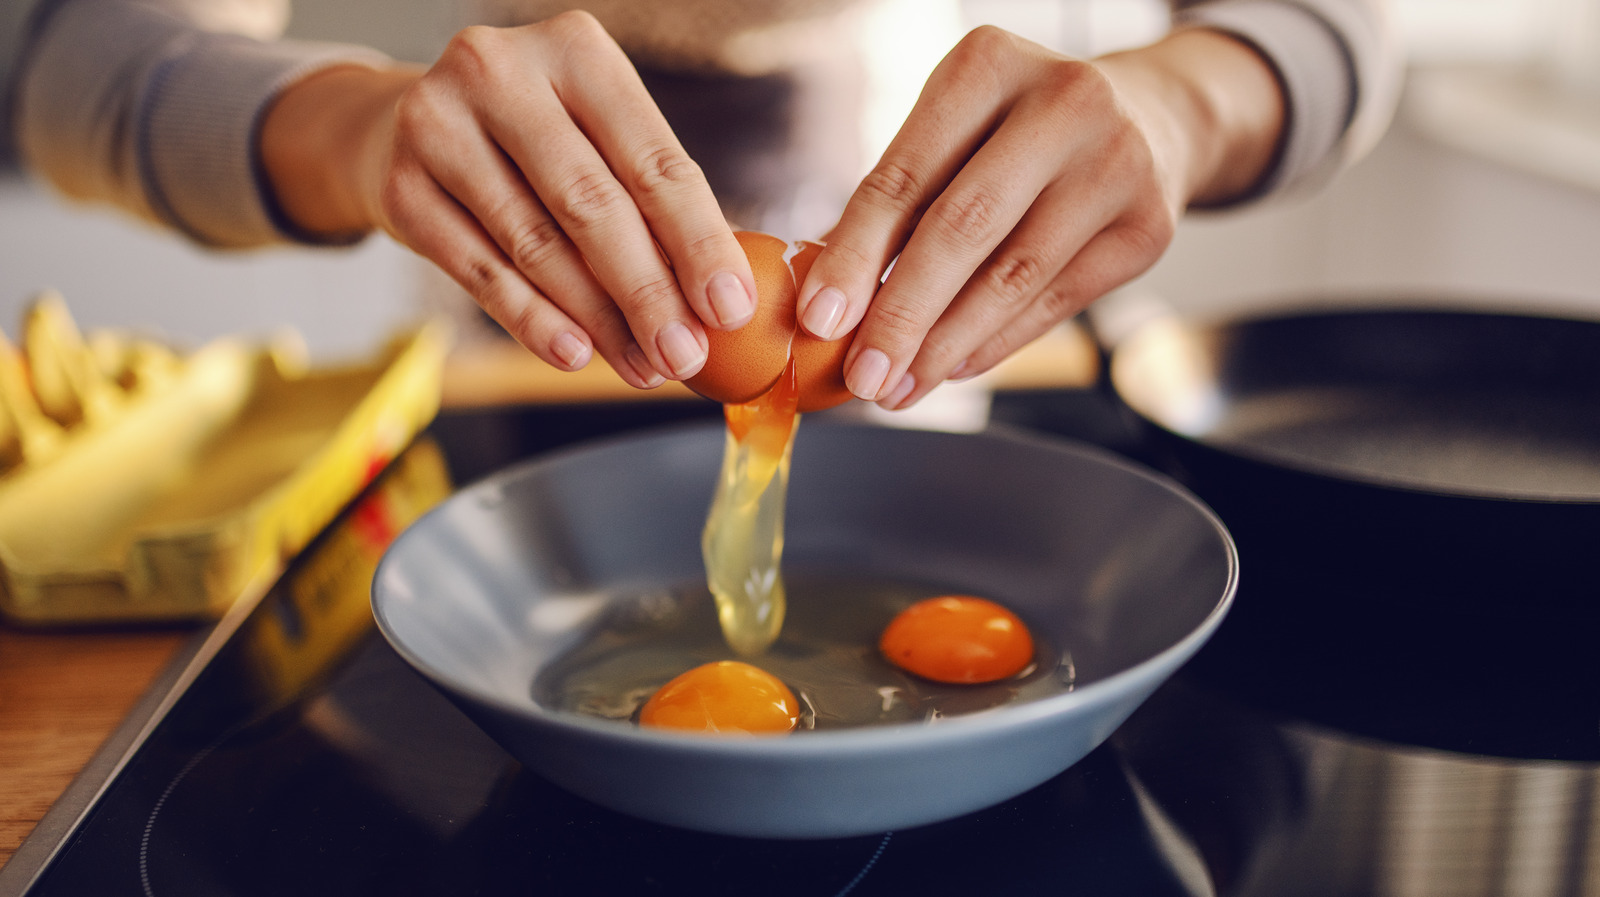 how-to-poach-eggs-in-wolfgang-puck-egg-poacher-pan